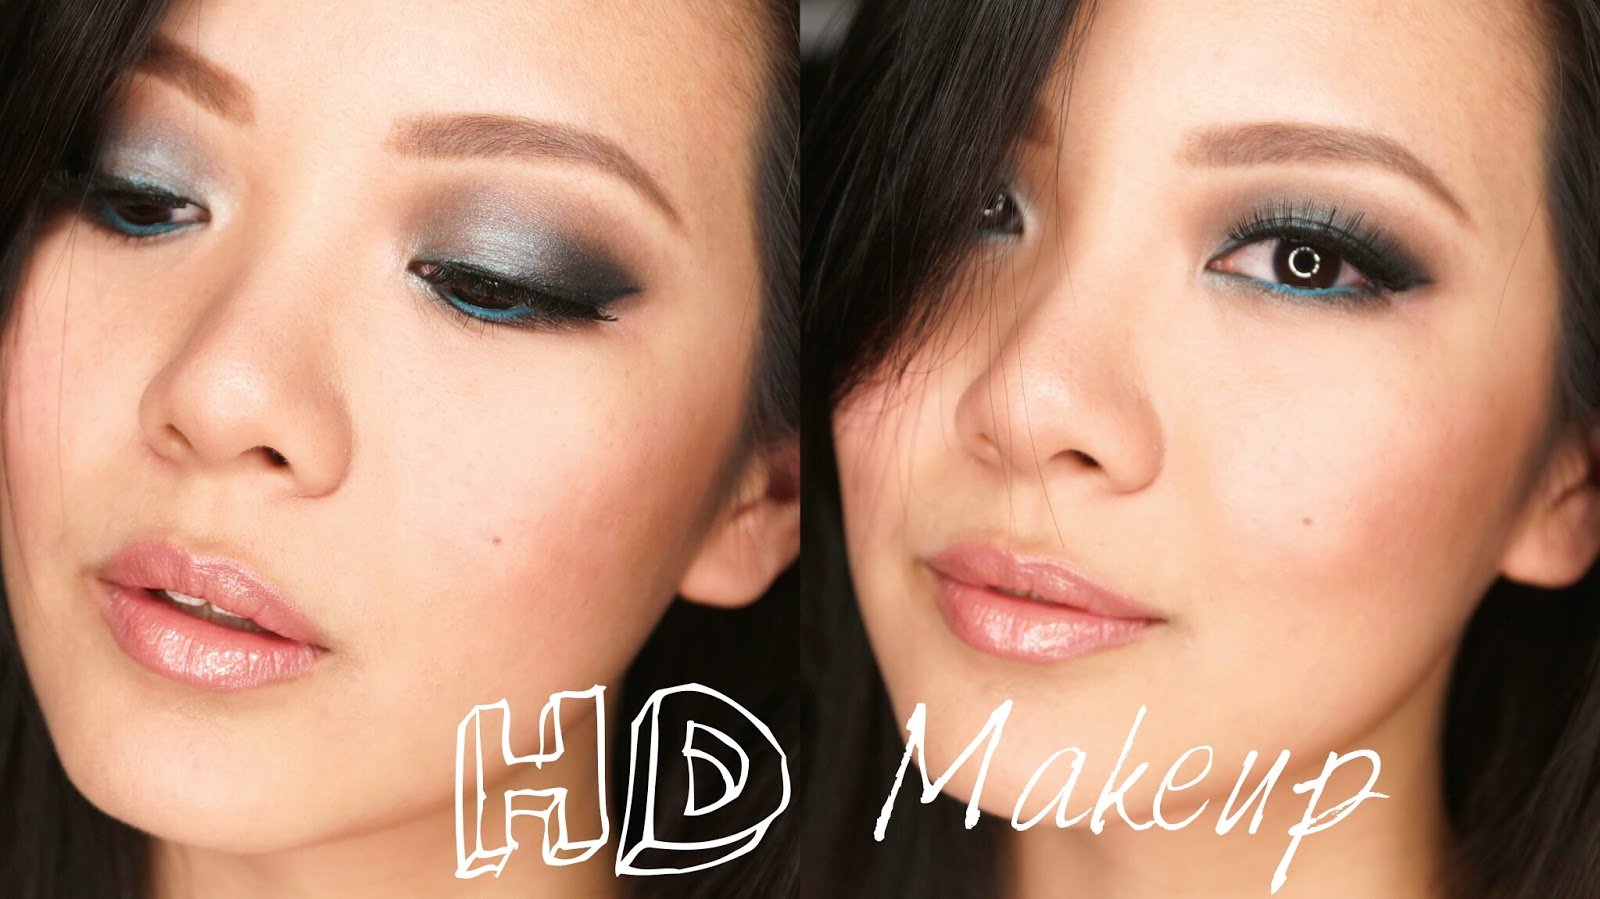 Prom Eye Makeup Tutorial Makeup Tutorial Photography Friendly Hd Makeup For Prom Formal